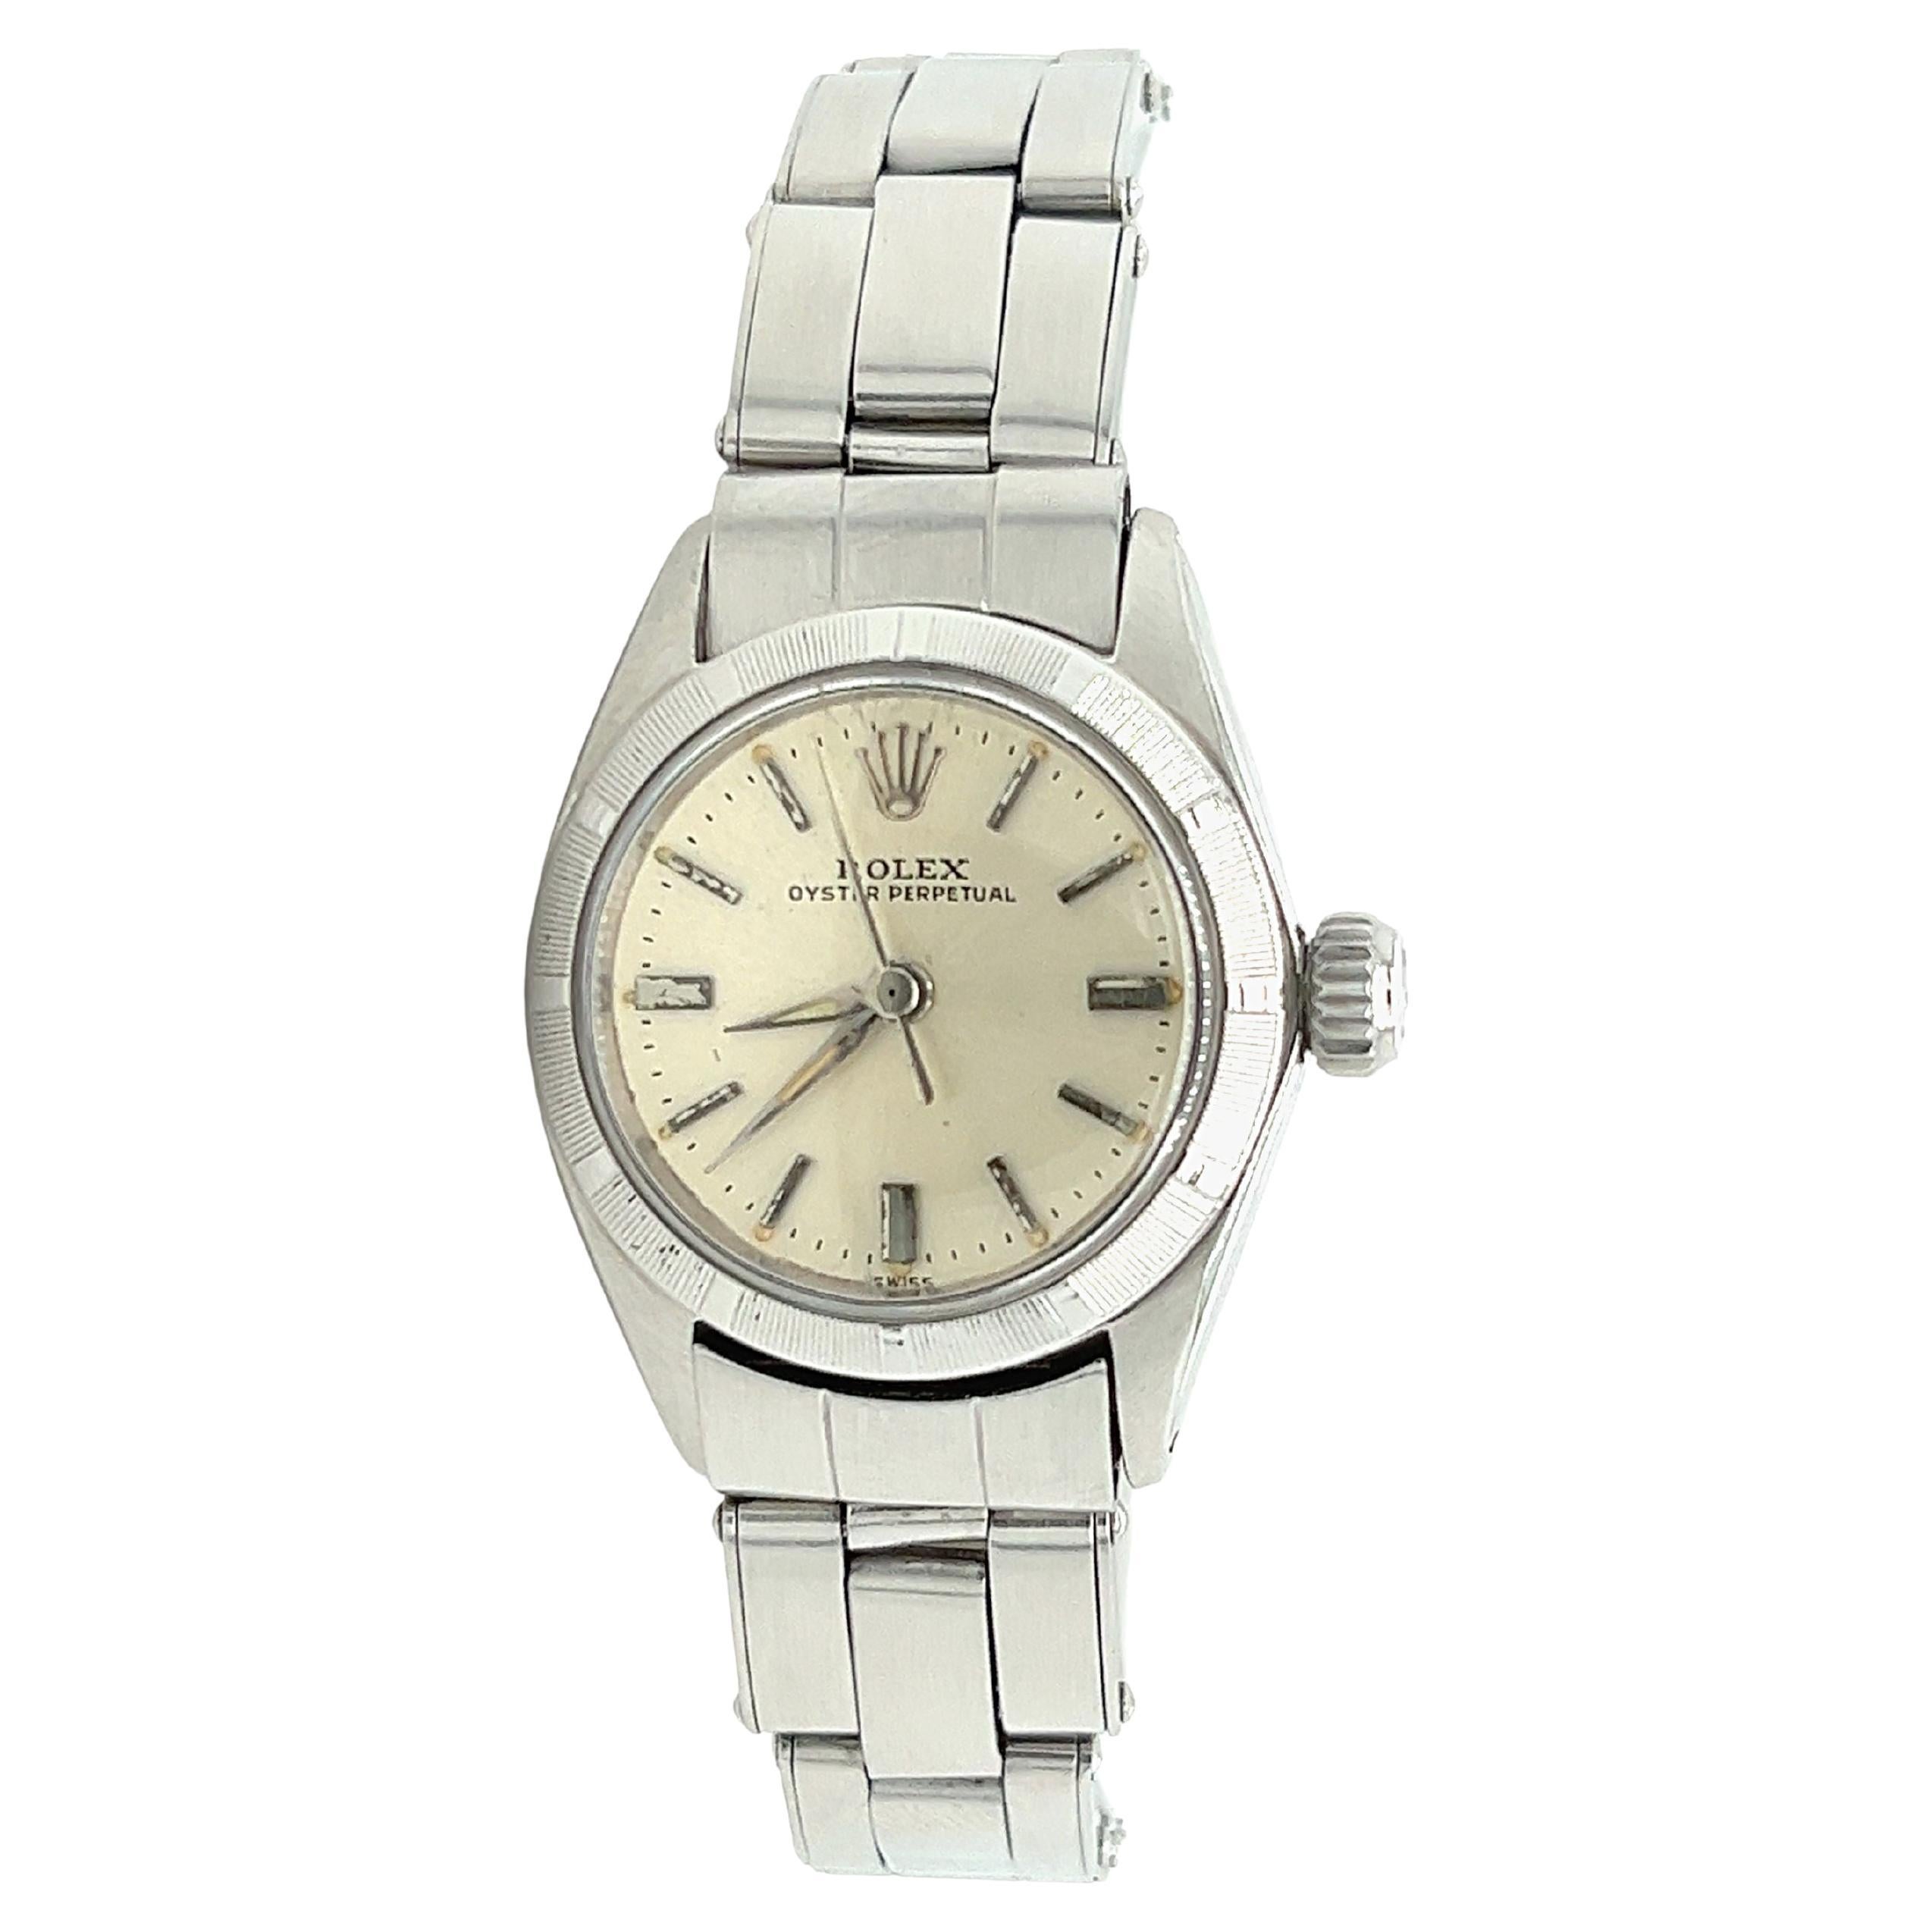 Vintage Rolex Oyster Perpetual Dial Ladies Watch Ref. 6623 For Sale